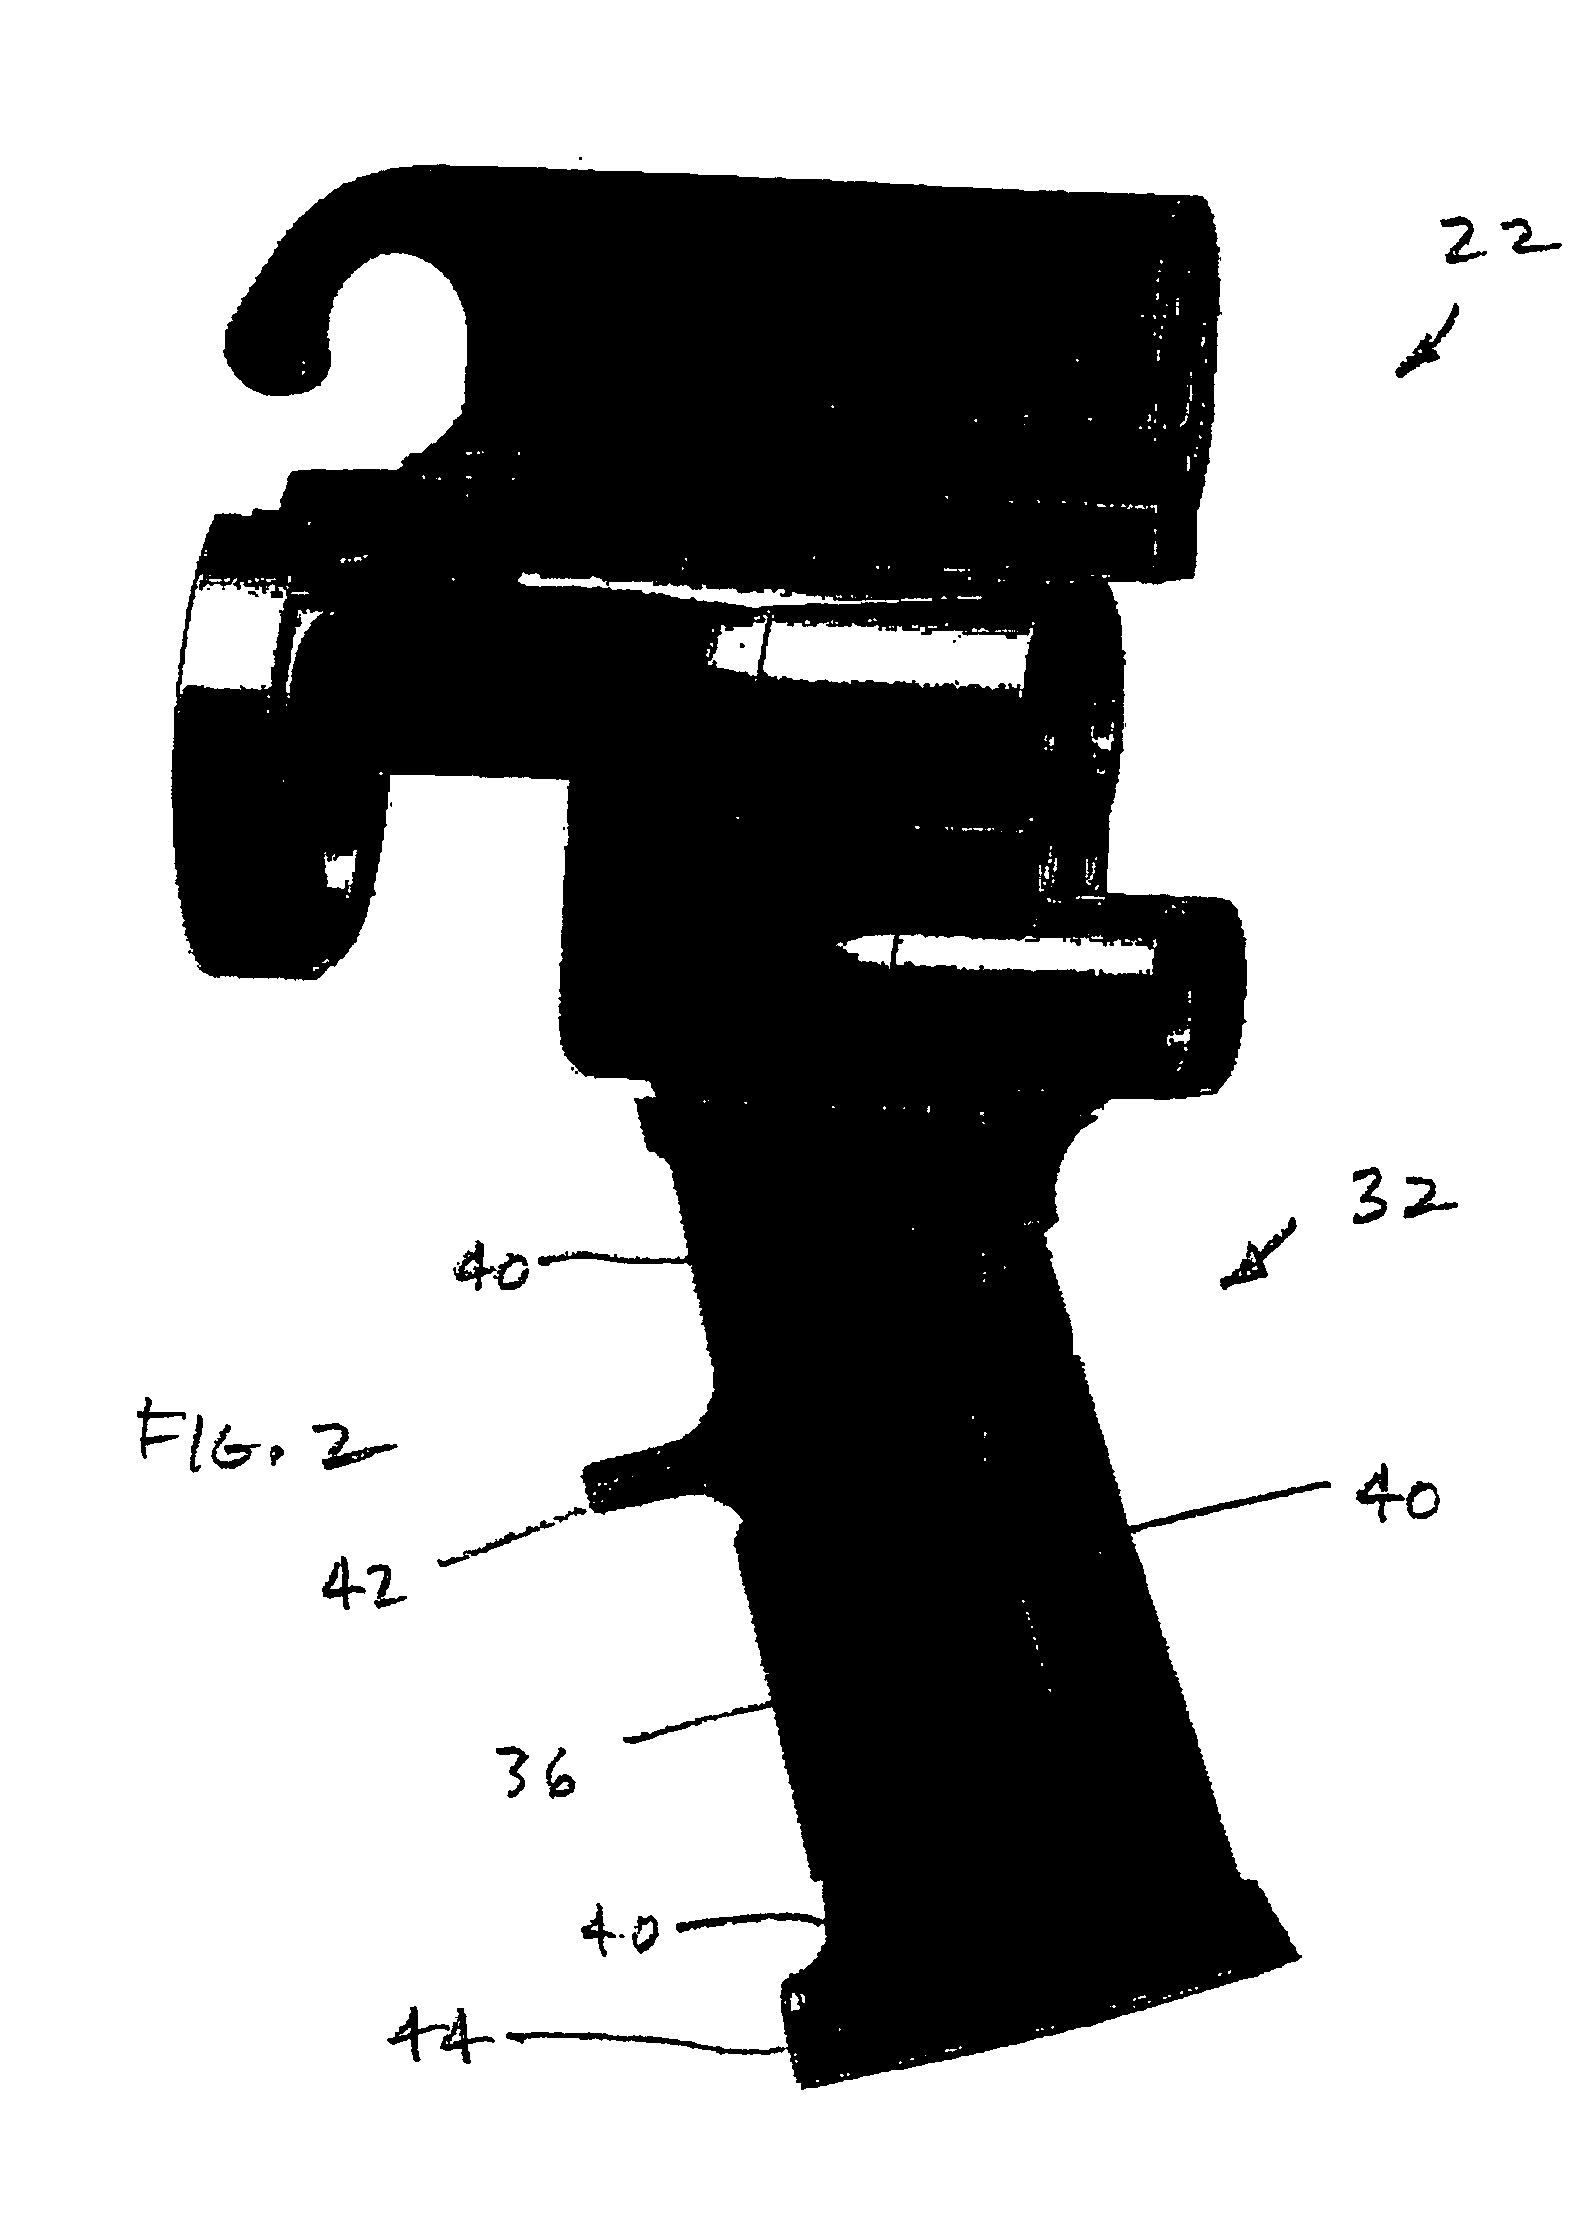 Grip cover for coating dispensing device hand grip